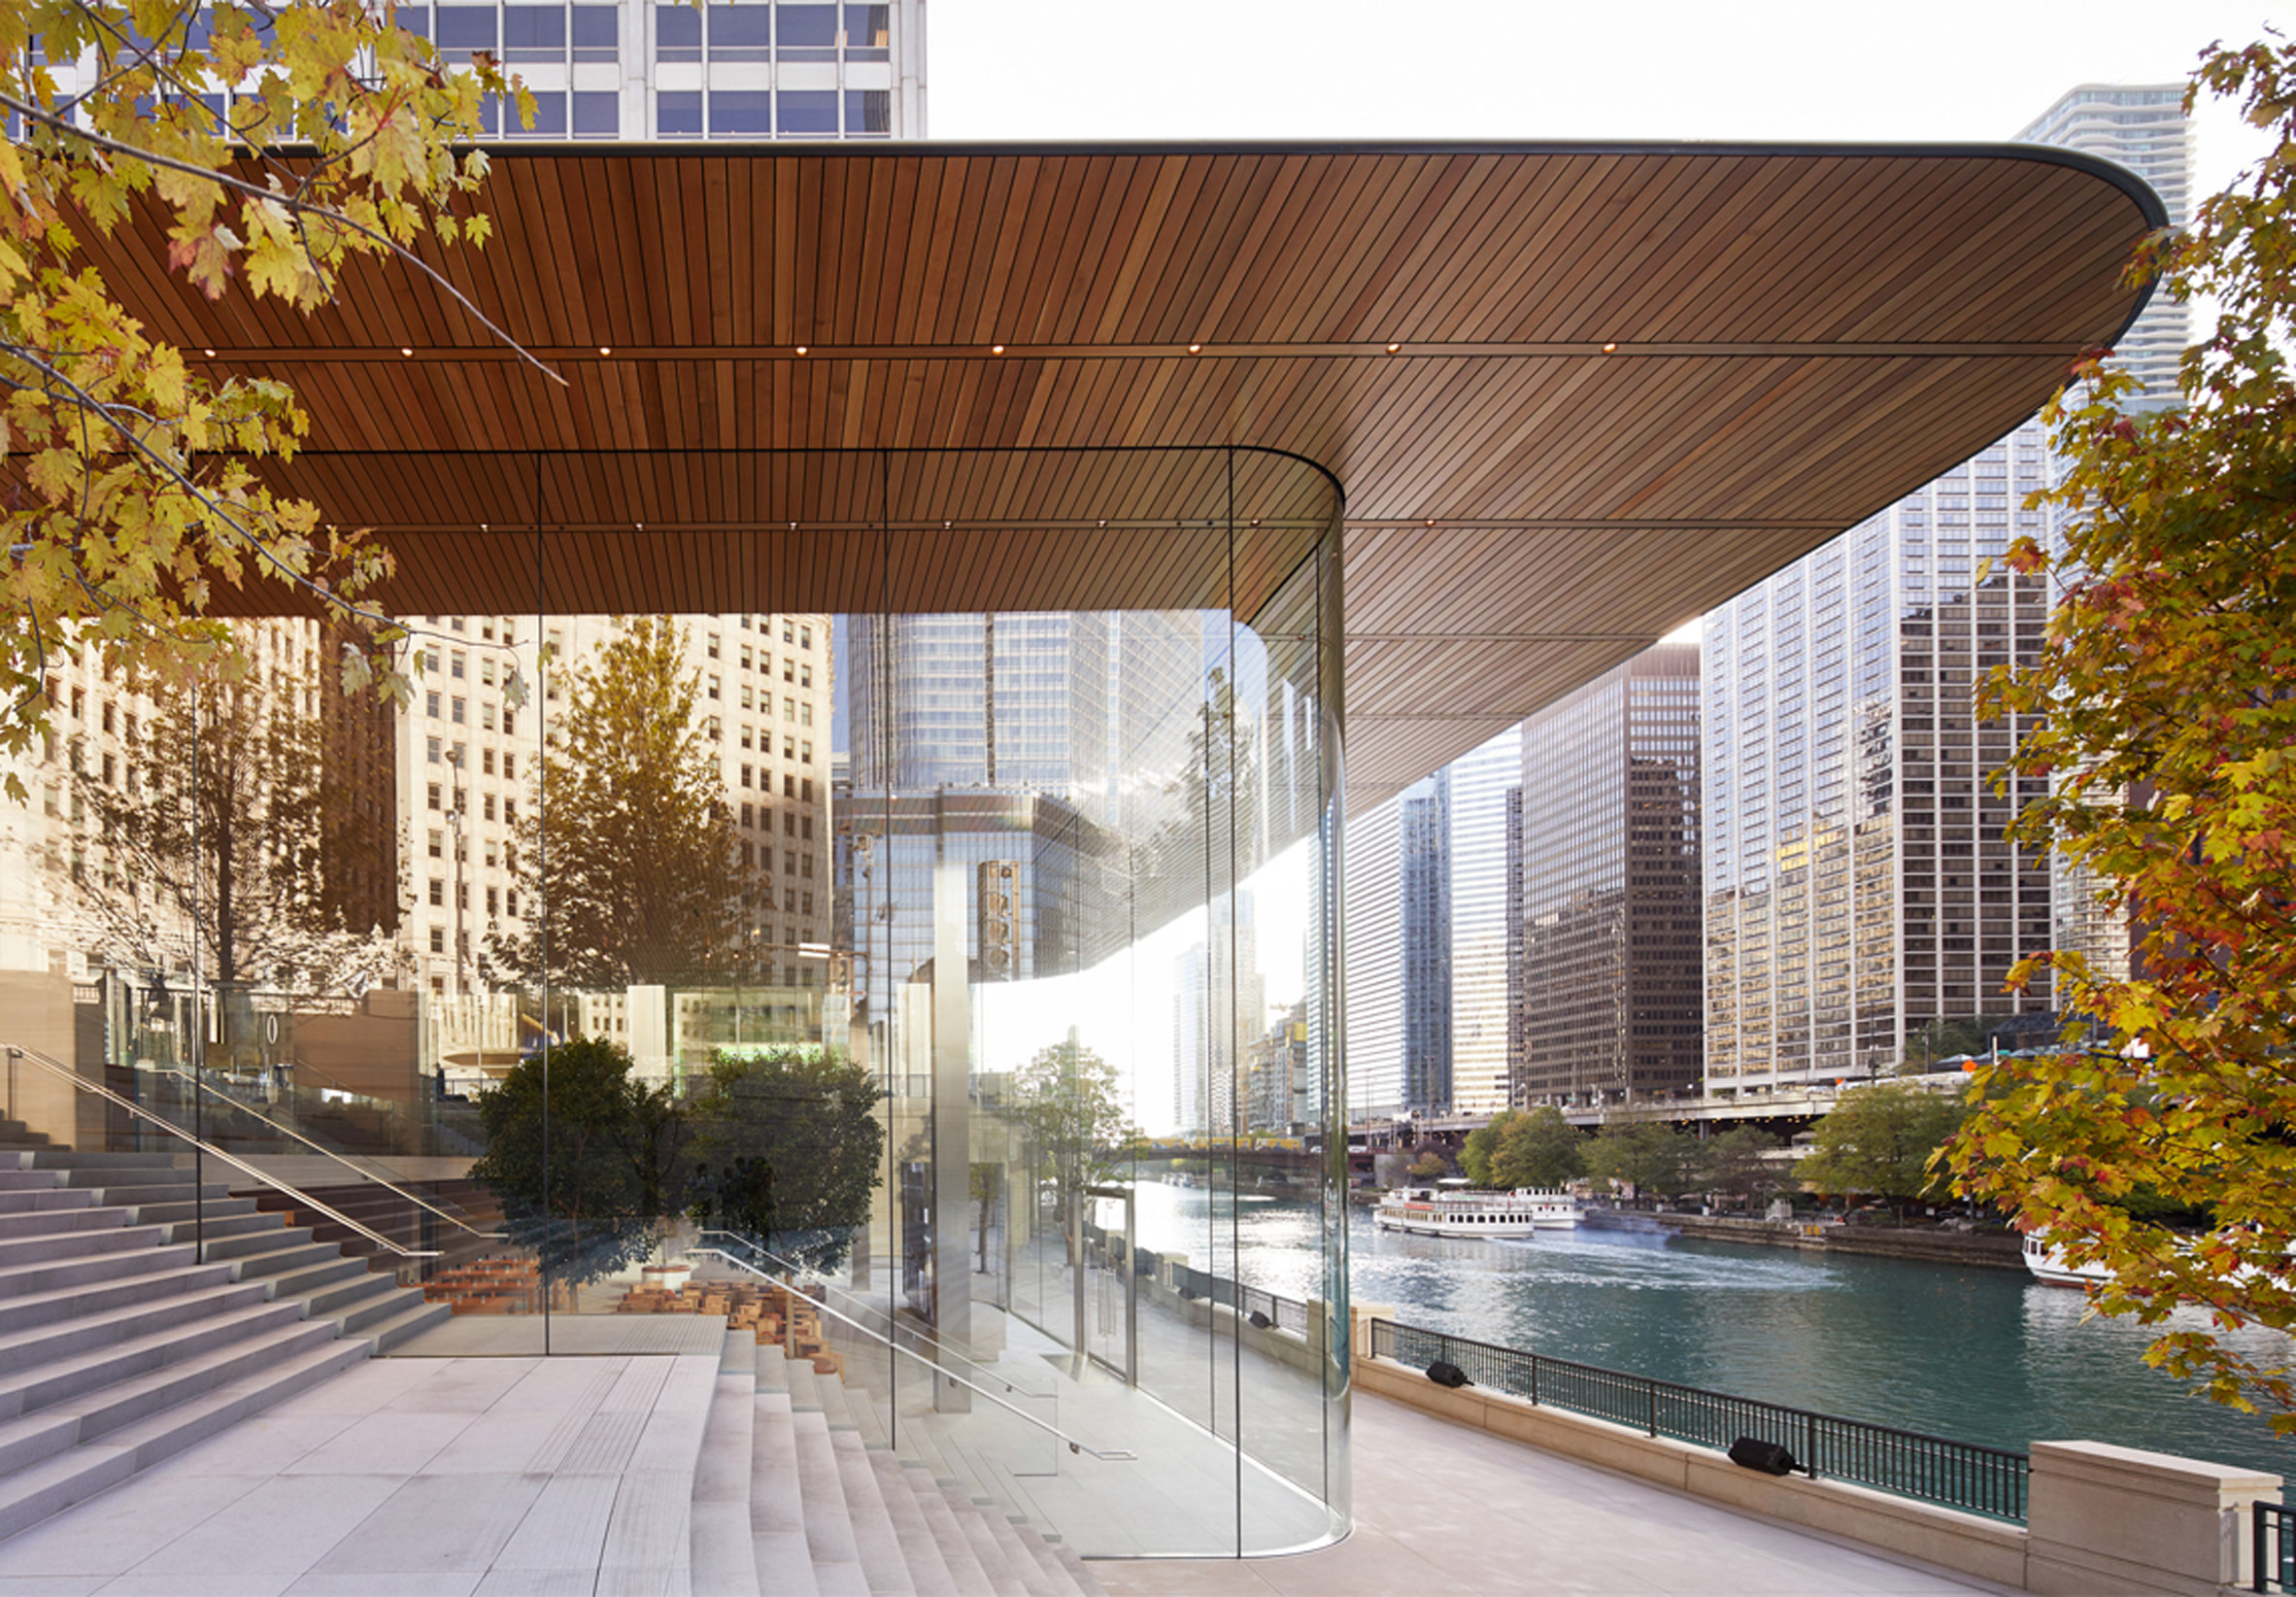 Macbook-shaped roof tops Foster + Partners' glazed Apple Store in Chicago